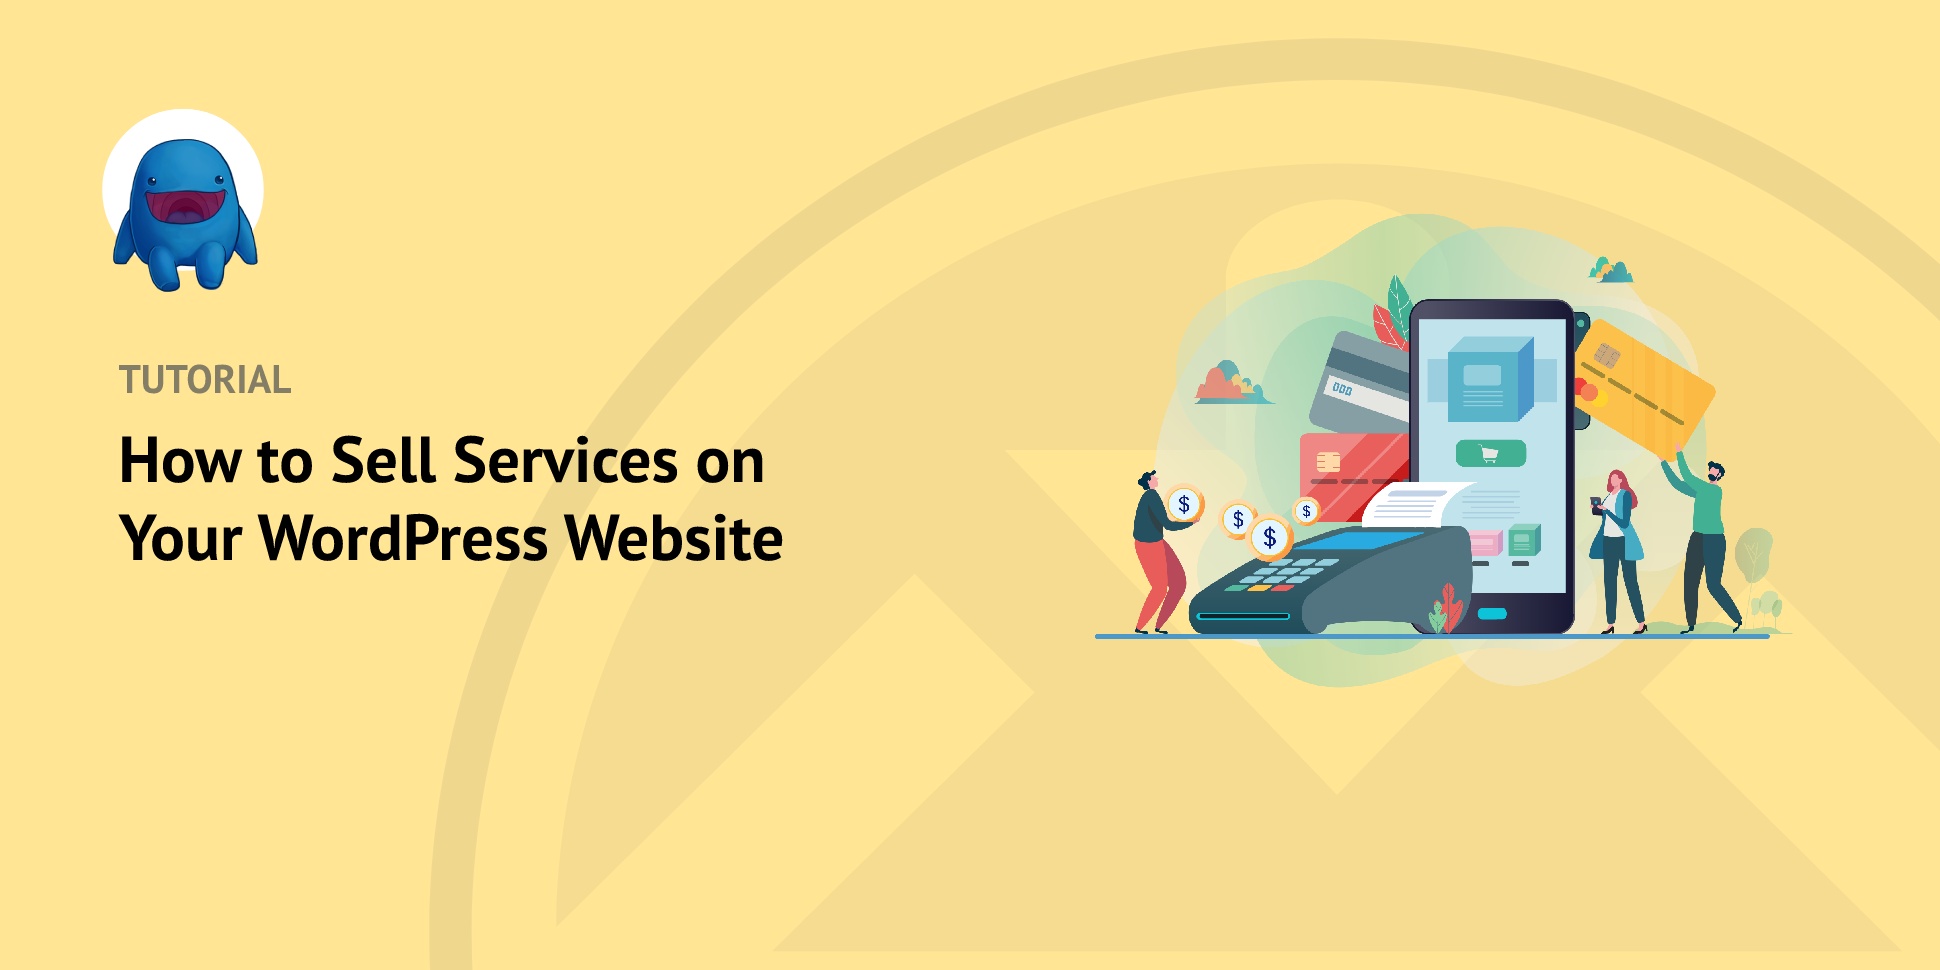 How to Sell Services in WordPress